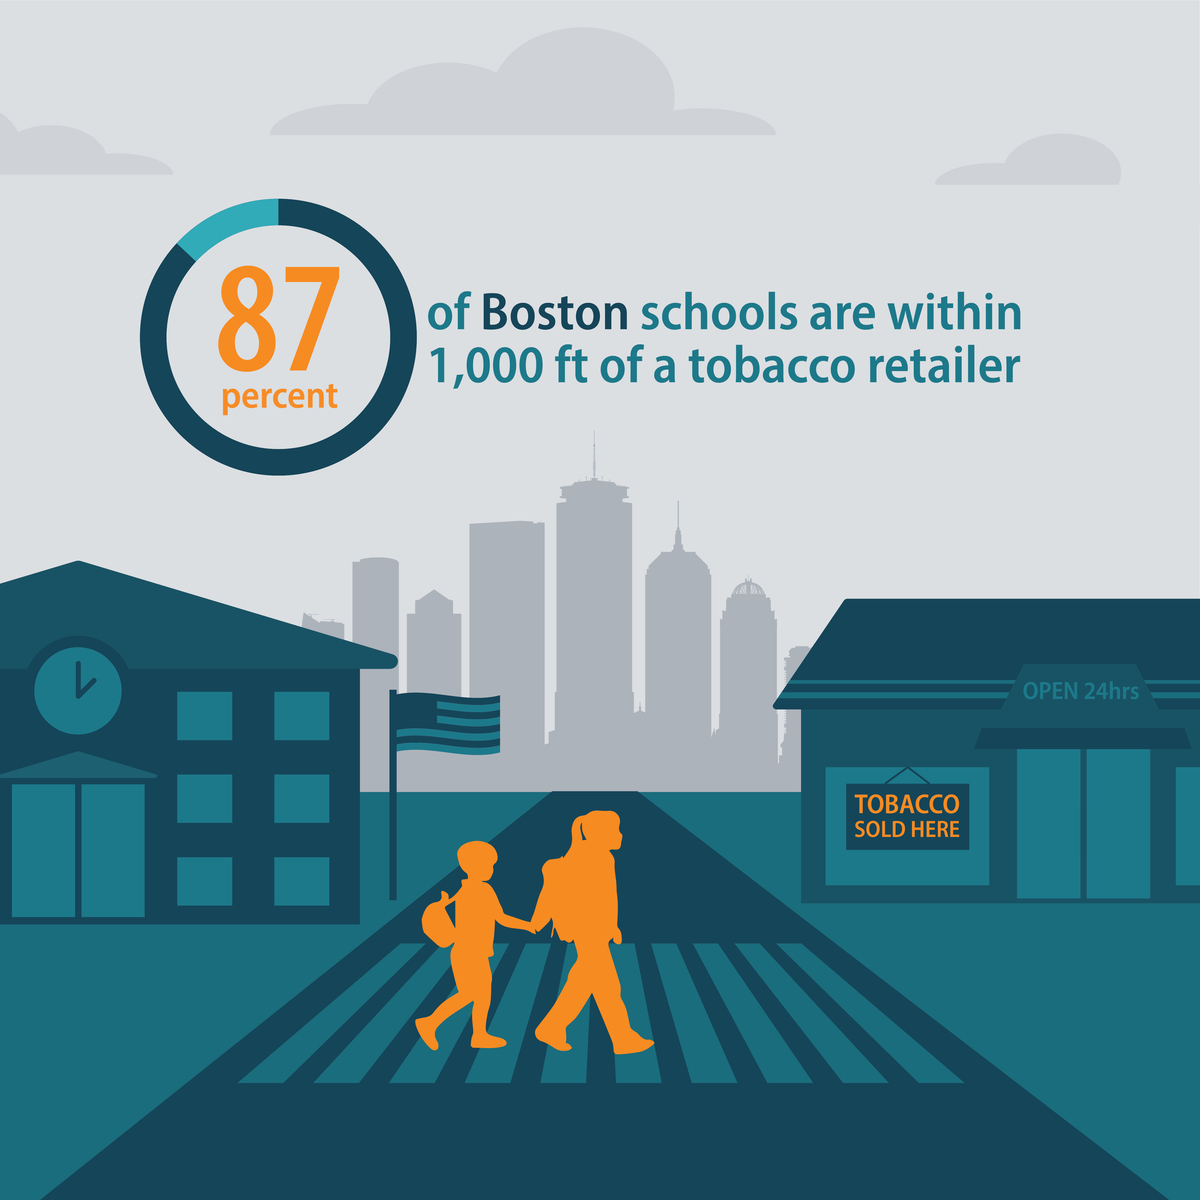 87 percent of Boston schools are within 1,000 feet of a tobacco retailer